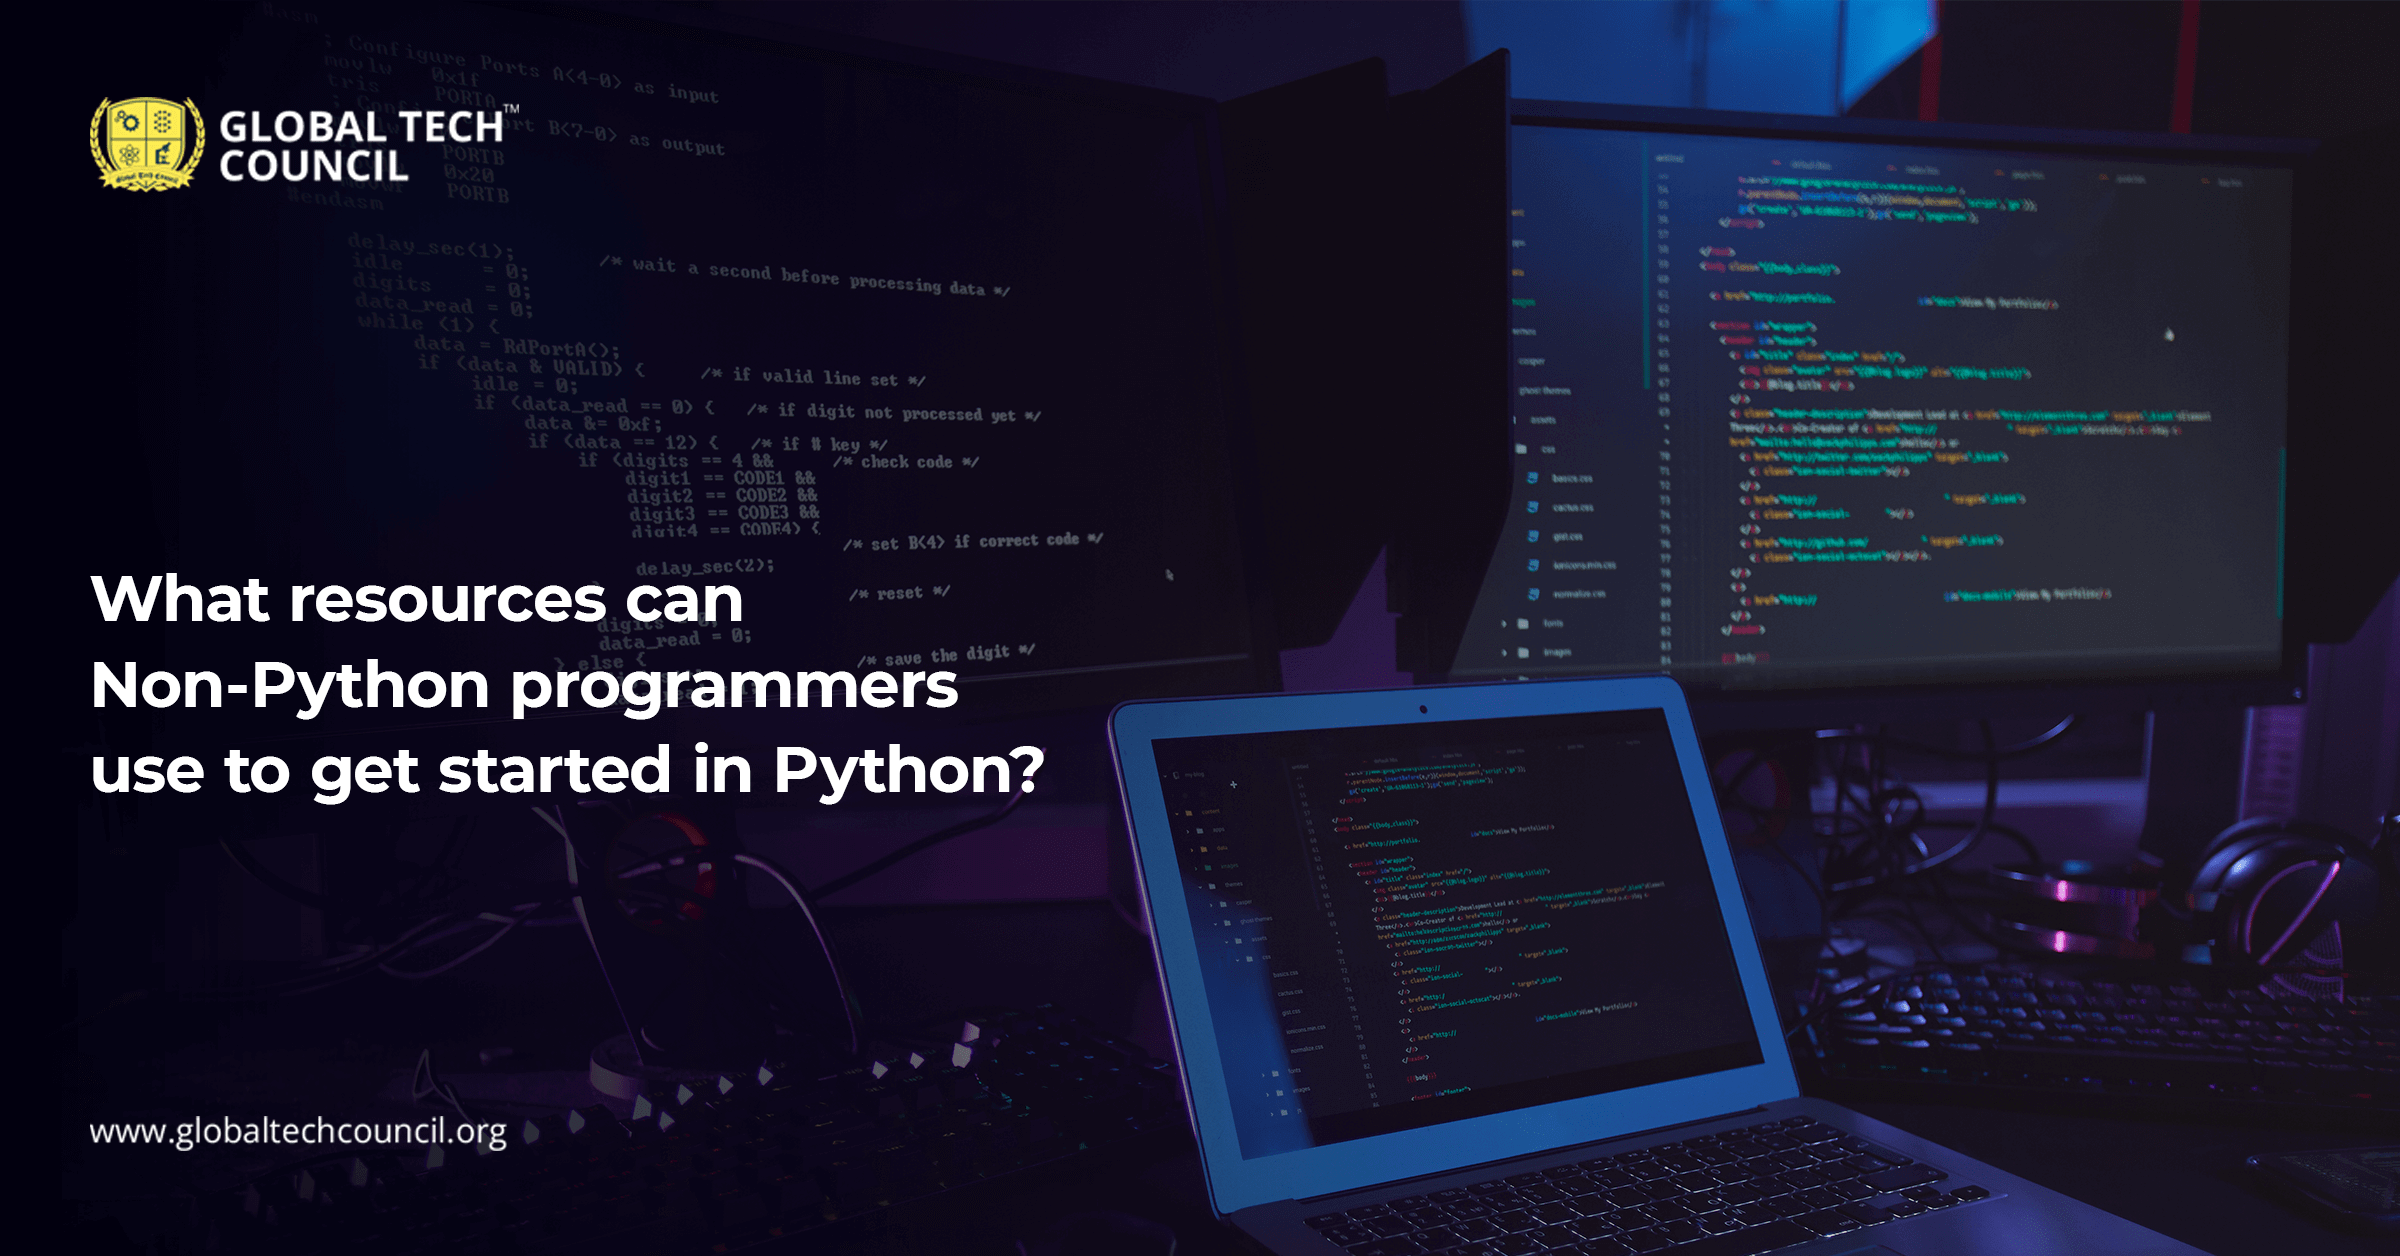 What resources can Non-Python programmers use to get started in Python